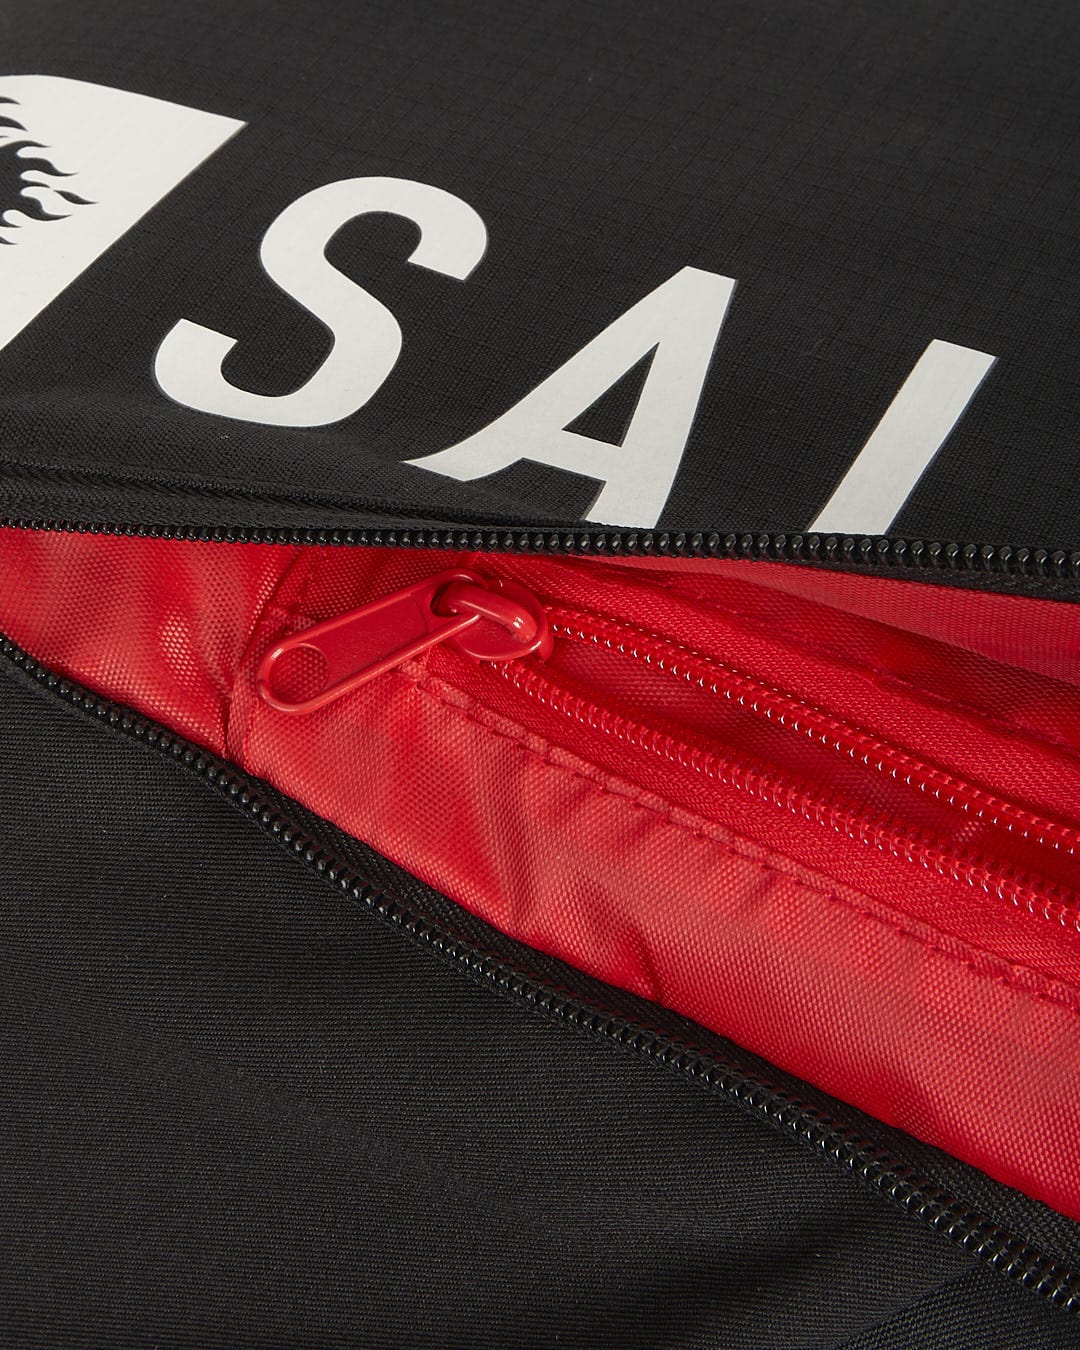 A Saltrock Streamline - Backpack - Black with the word sailor on it.